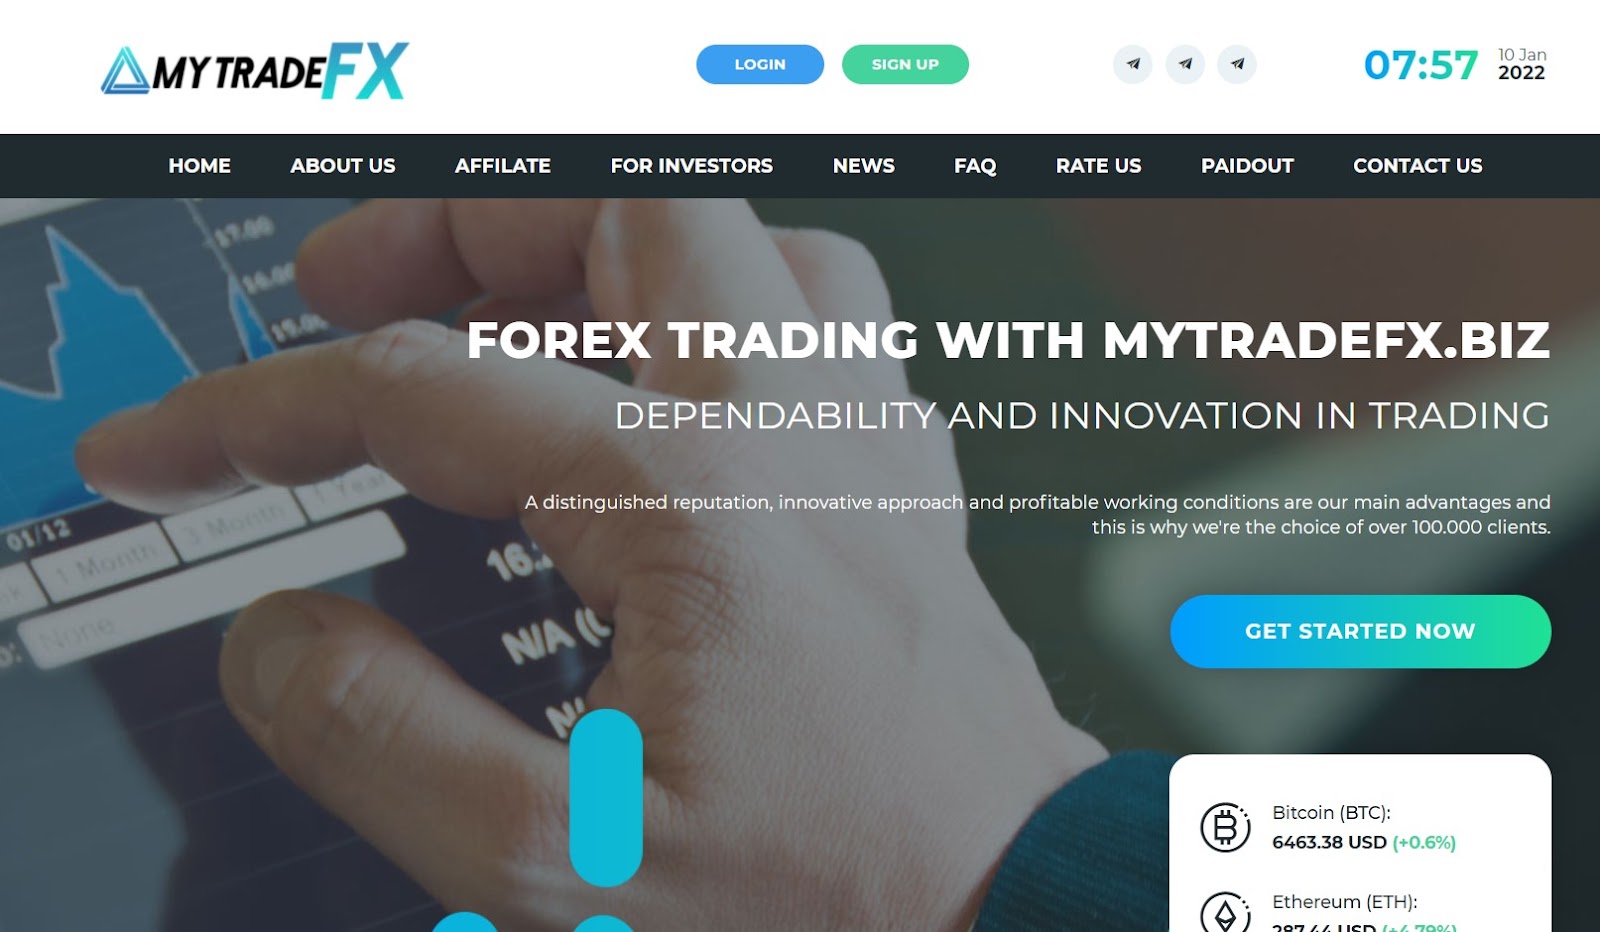 mytradefx.biz, mytradefx.biz new hyip review,mytradefx.biz scam or paying,mytradefx.biz scam or legit,mytradefx.biz full review details and status,mytradefx.biz payout proof,mytradefx.biz new hyip,mytradefx.biz oxifinance hyip,new hyip,best hyip,legit hyip,top hyip,hourly paying hyip,long term paying hyip,instant paying hyip,best investment project